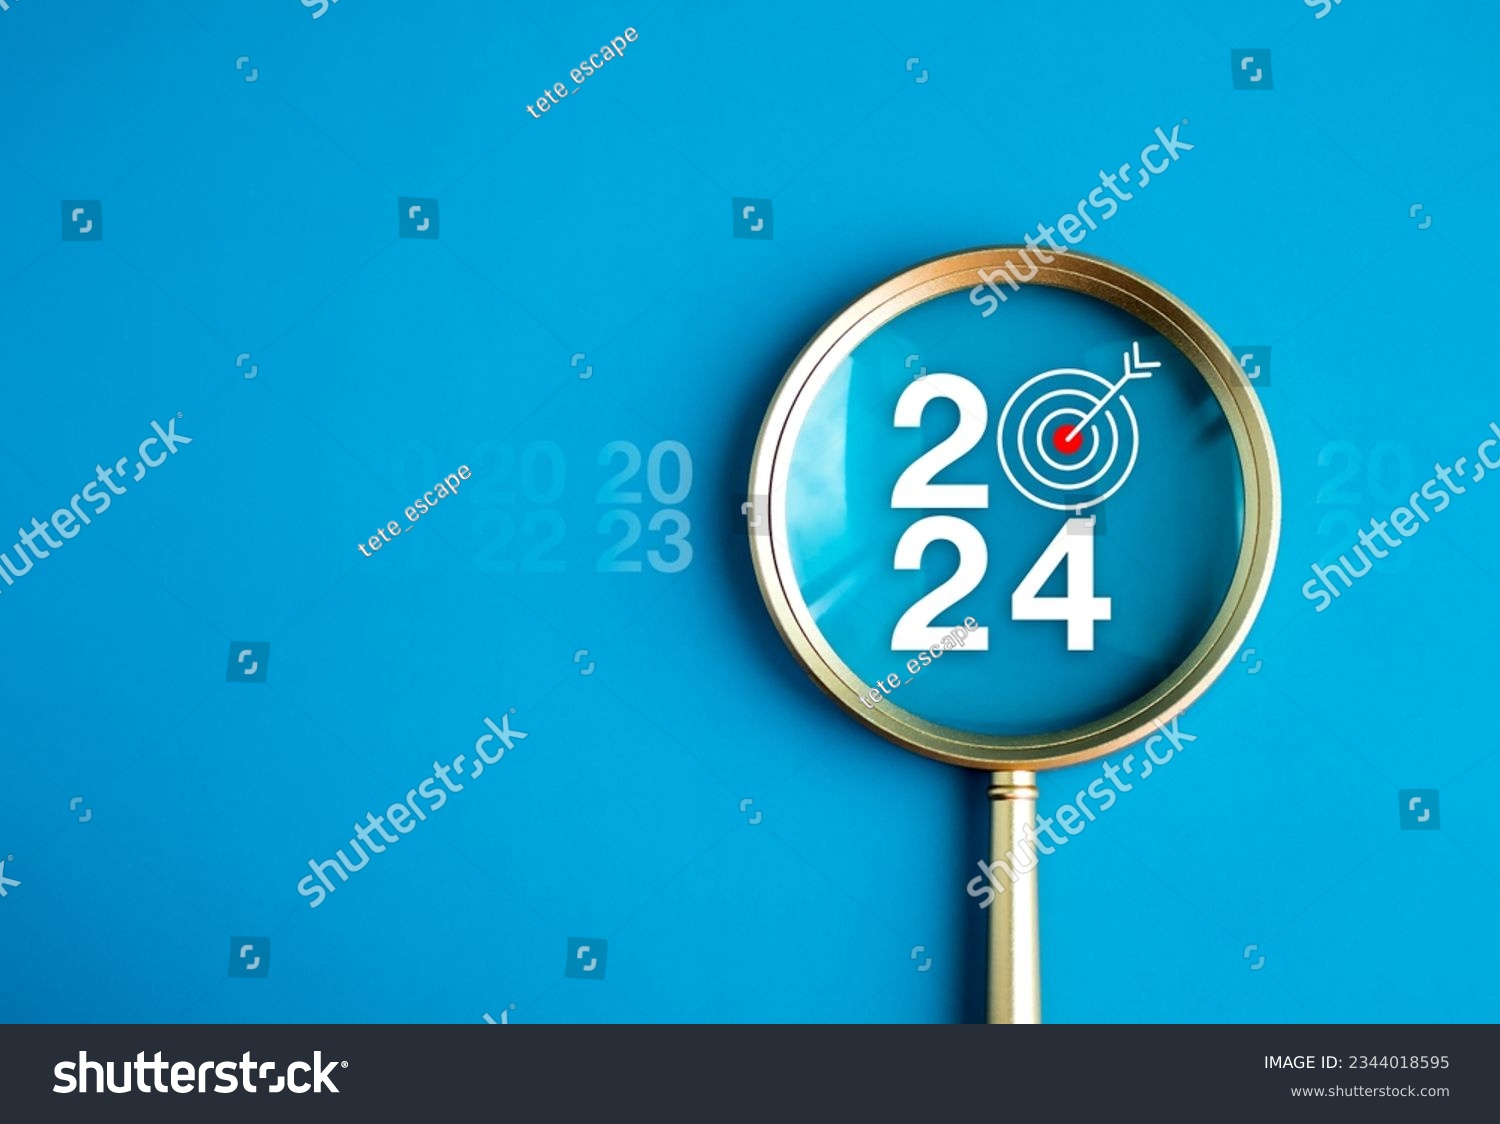 Happy new year 2024 with business concept banner. The big white 2024 year number with Target icon inside the golden magnifying glass on light blue background. Planning for goal and success concepts. #2344018595